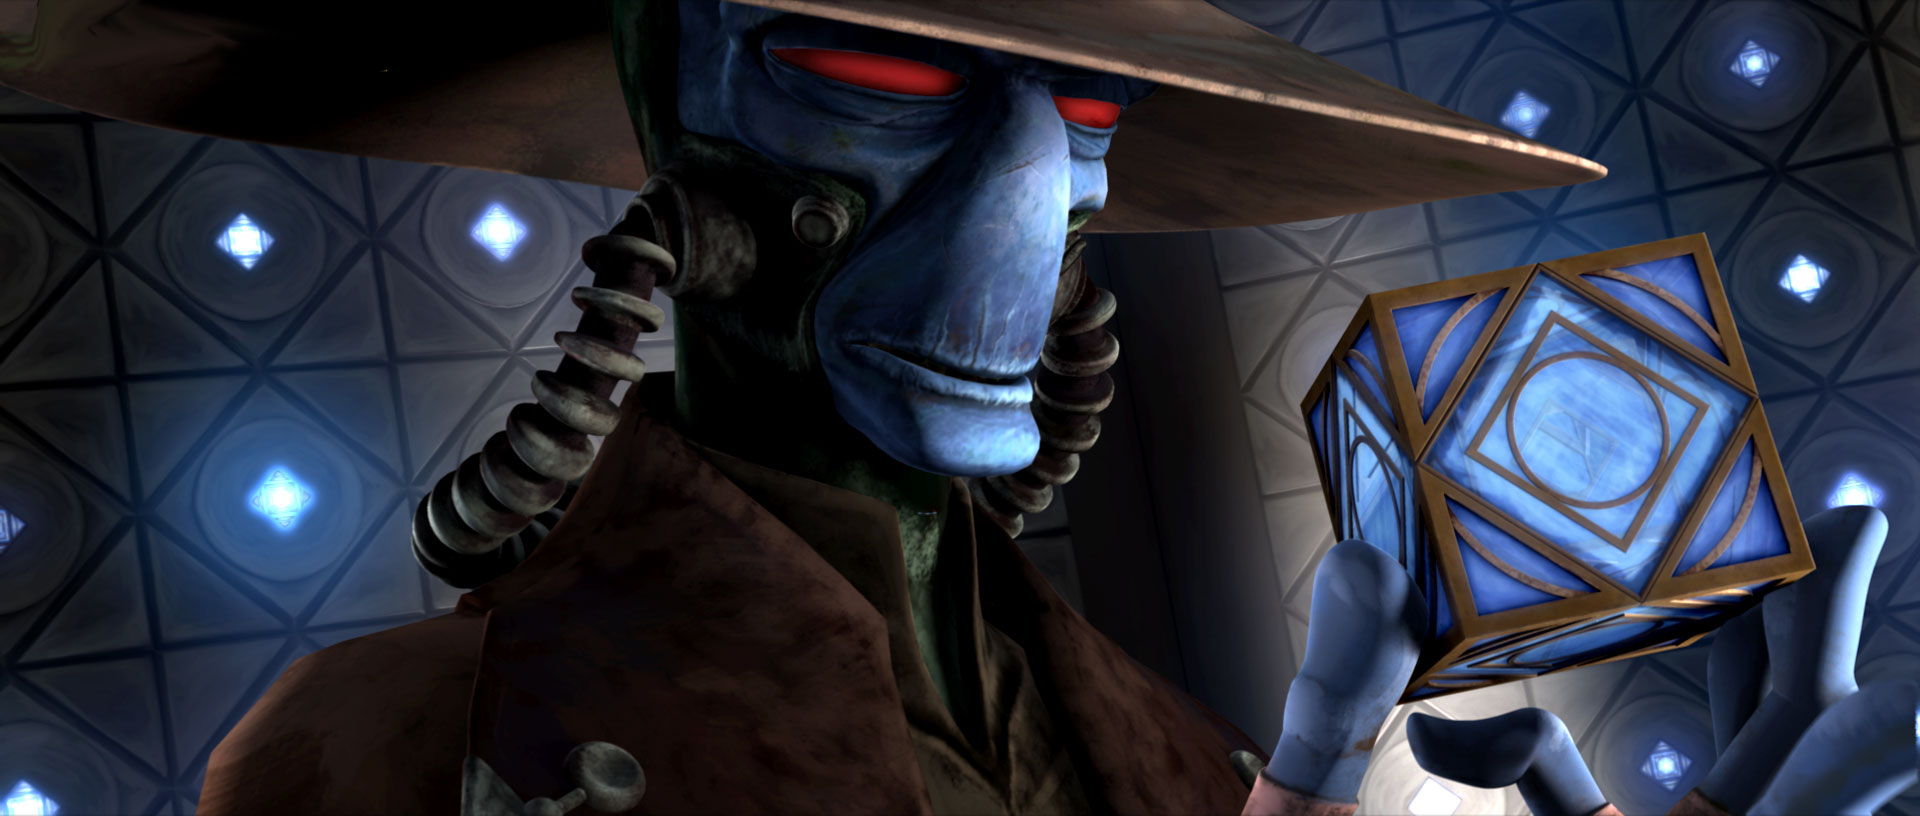 Cad Bane holding a holocron in Clone Wars